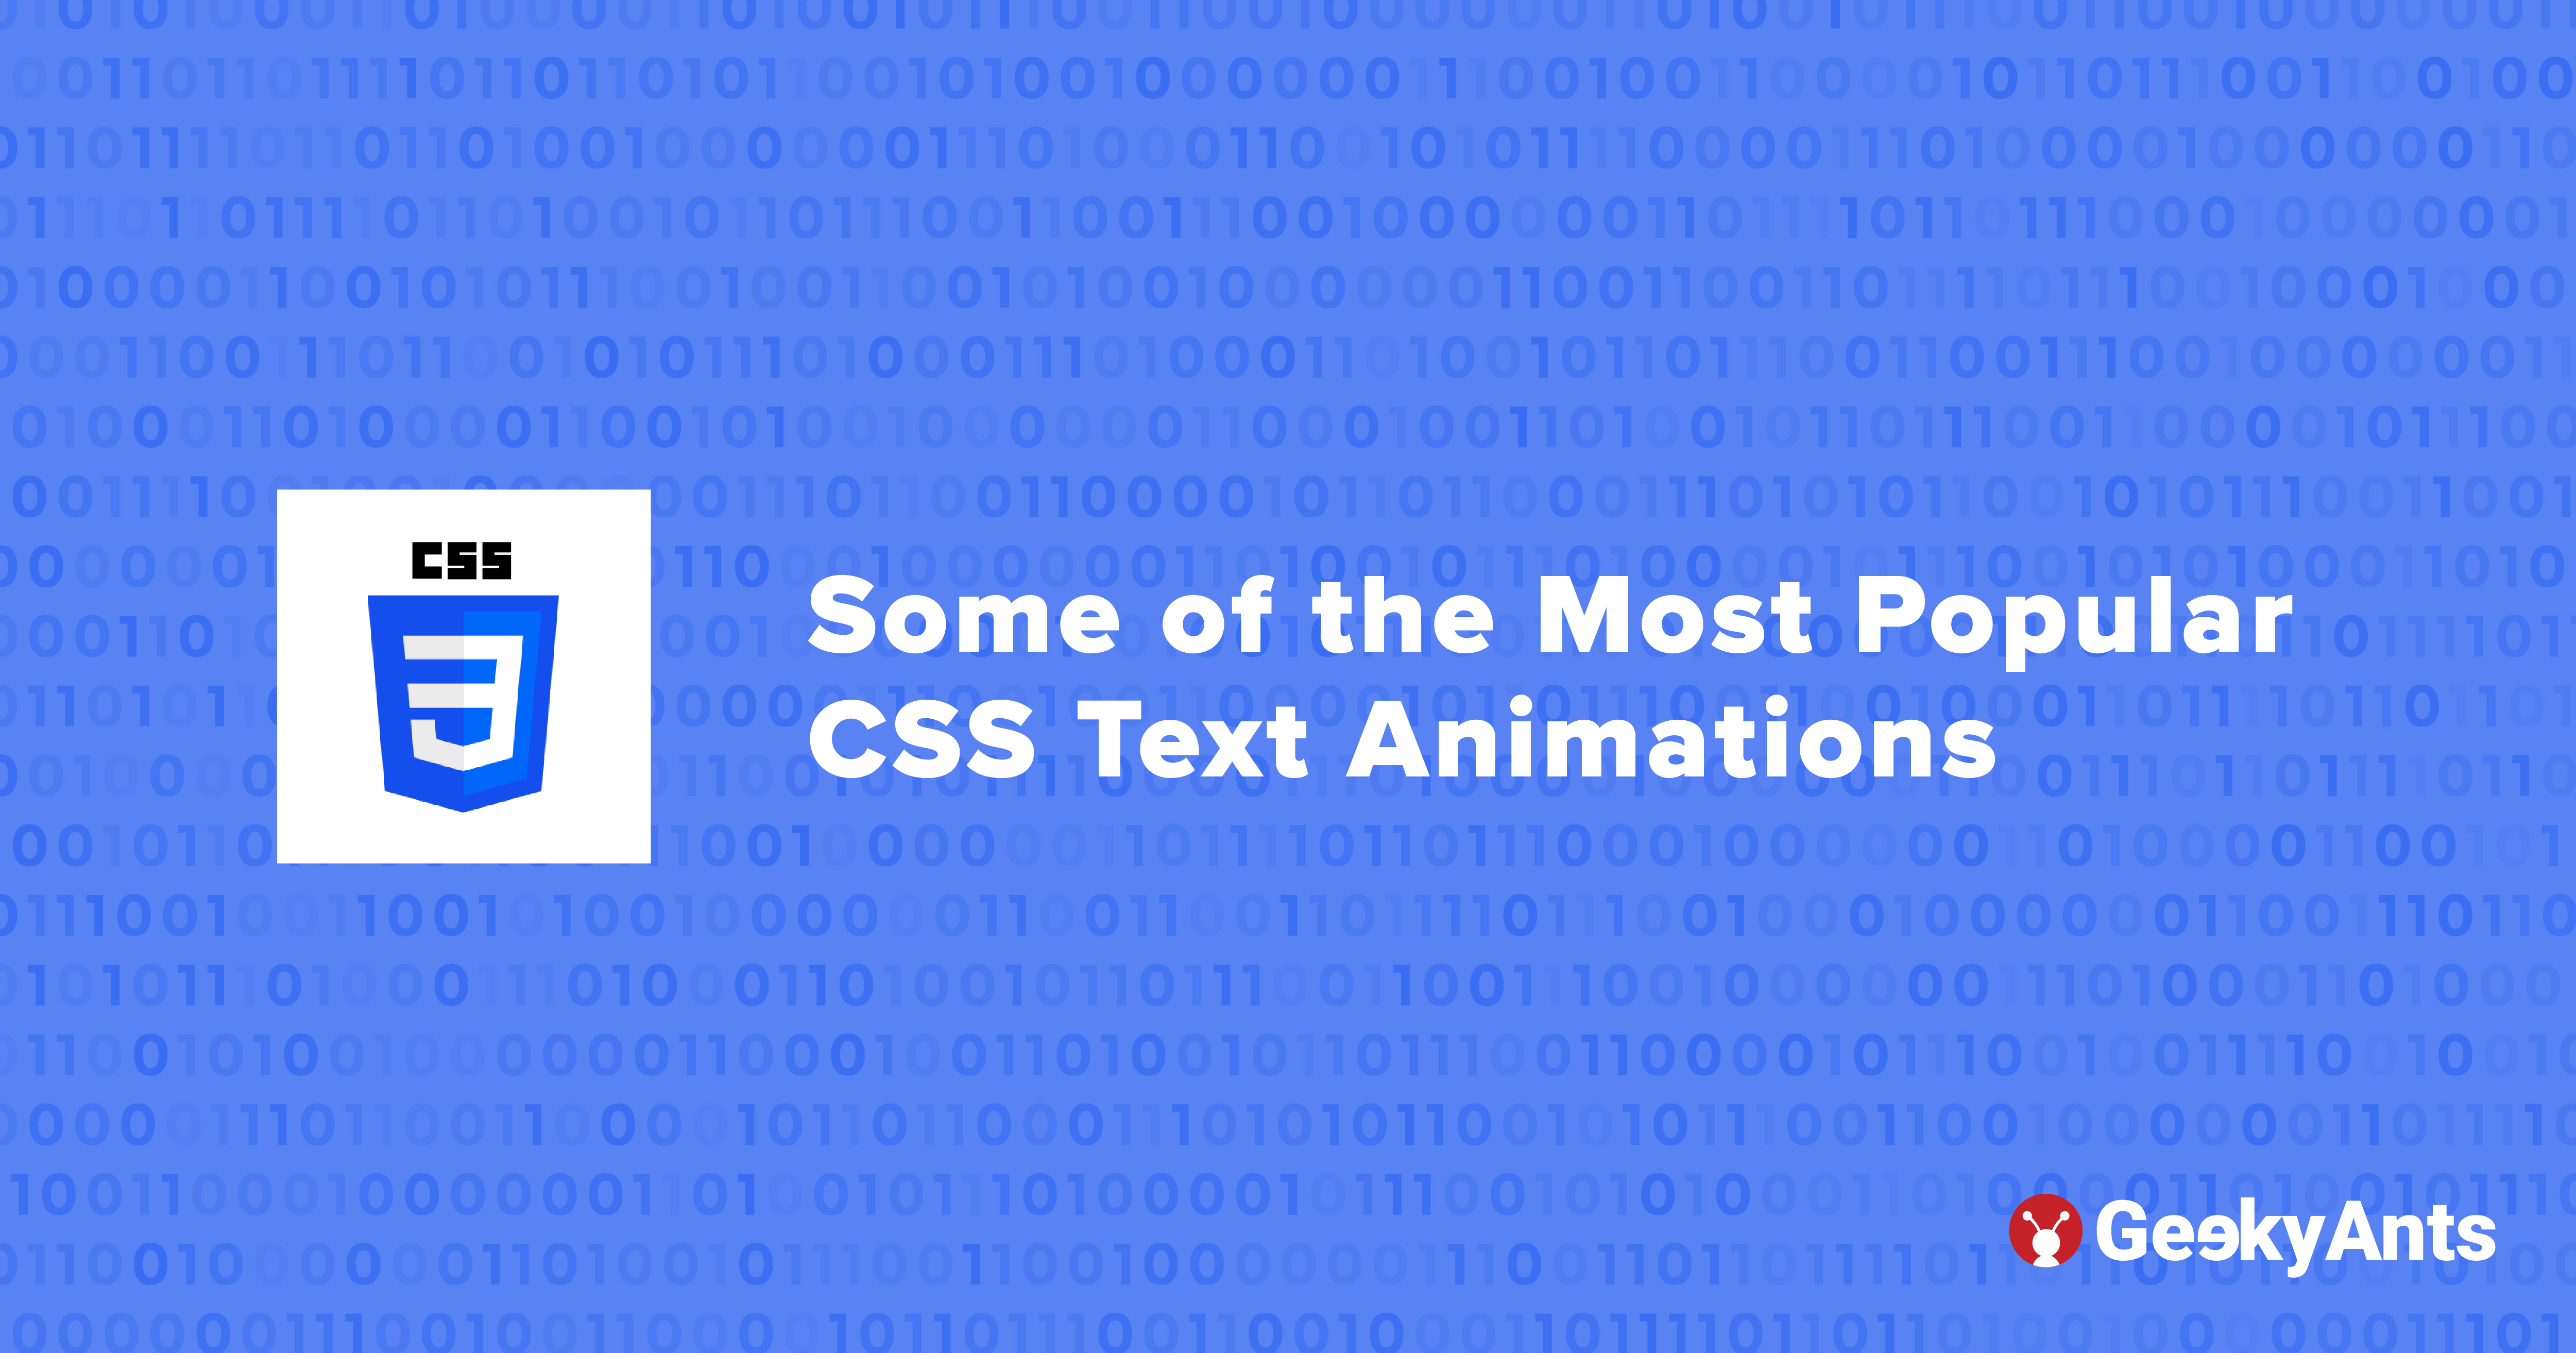 Some of the Most Popular CSS Text Animations